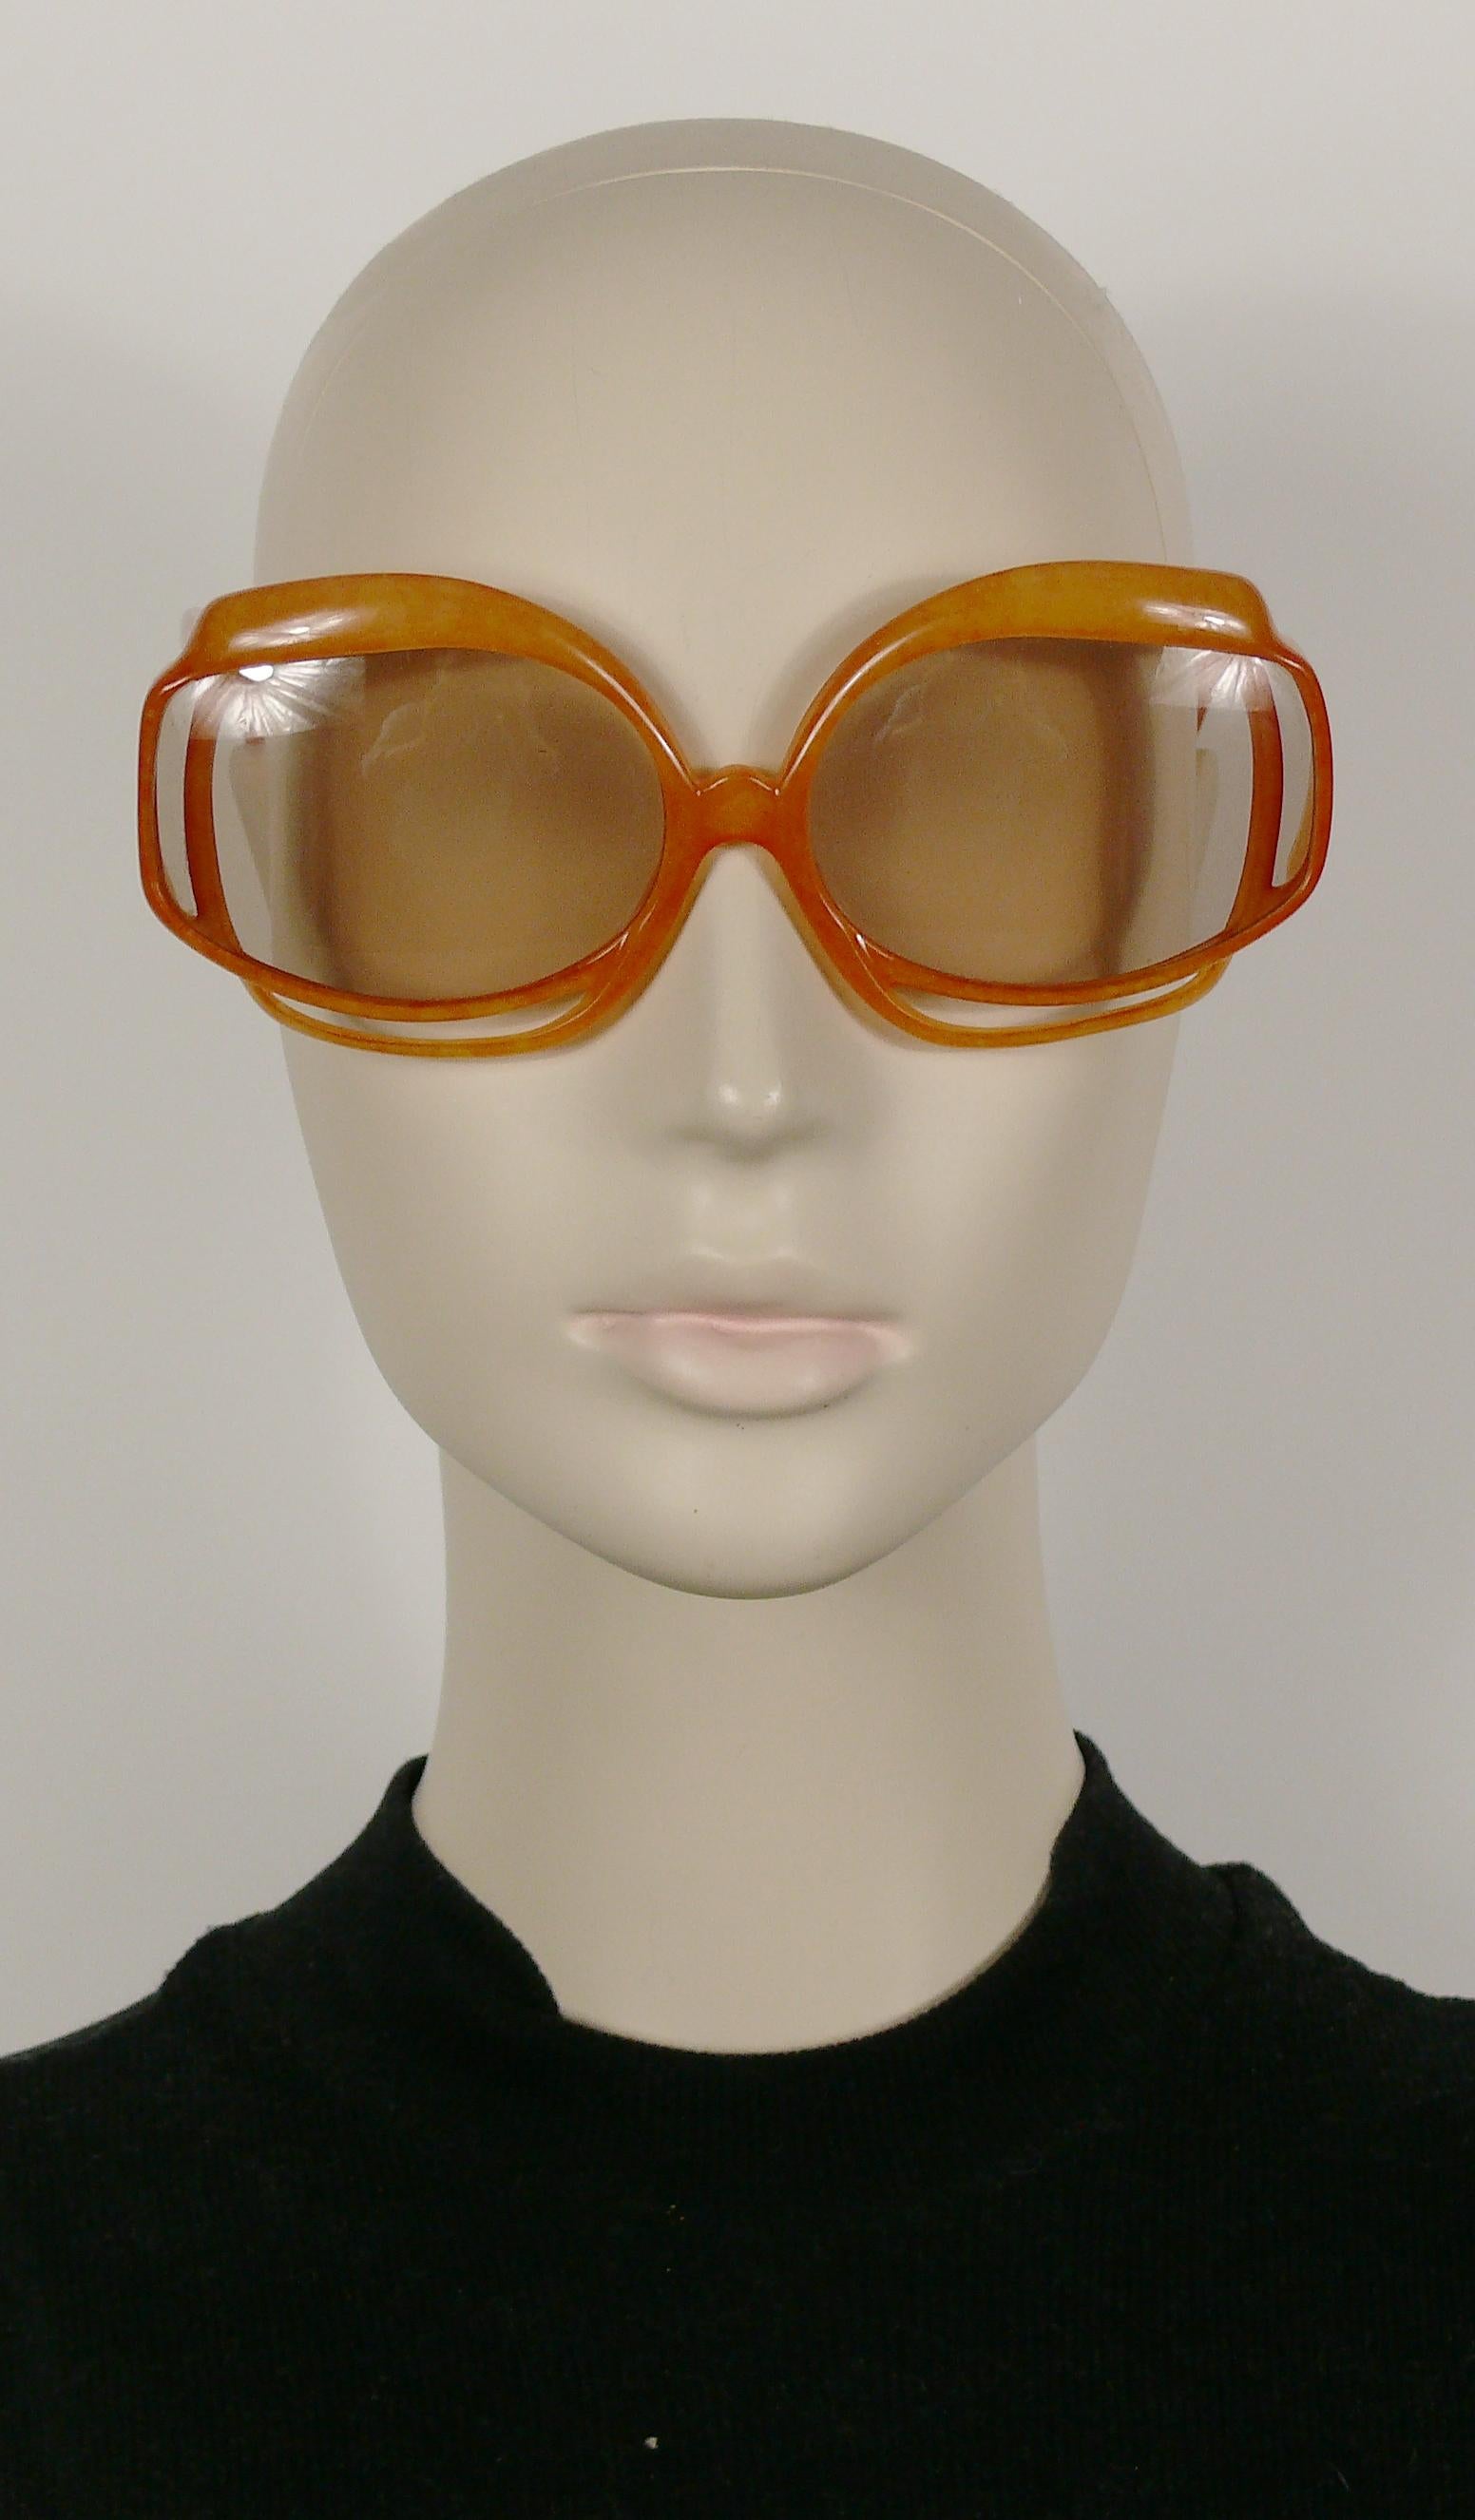 **** WE NO LONGER SHIP SUNGLASSES TO THE USA DUE TO CUSTOMS RESTRICTIONS FOR SUNGLASSES (MEDICAL DEVICES) ****

CHRISTIAN DIOR vintage oversized sunglasses featuring a tangerine colour marbled frame, tinted plastic lenses and silver toned detailing.